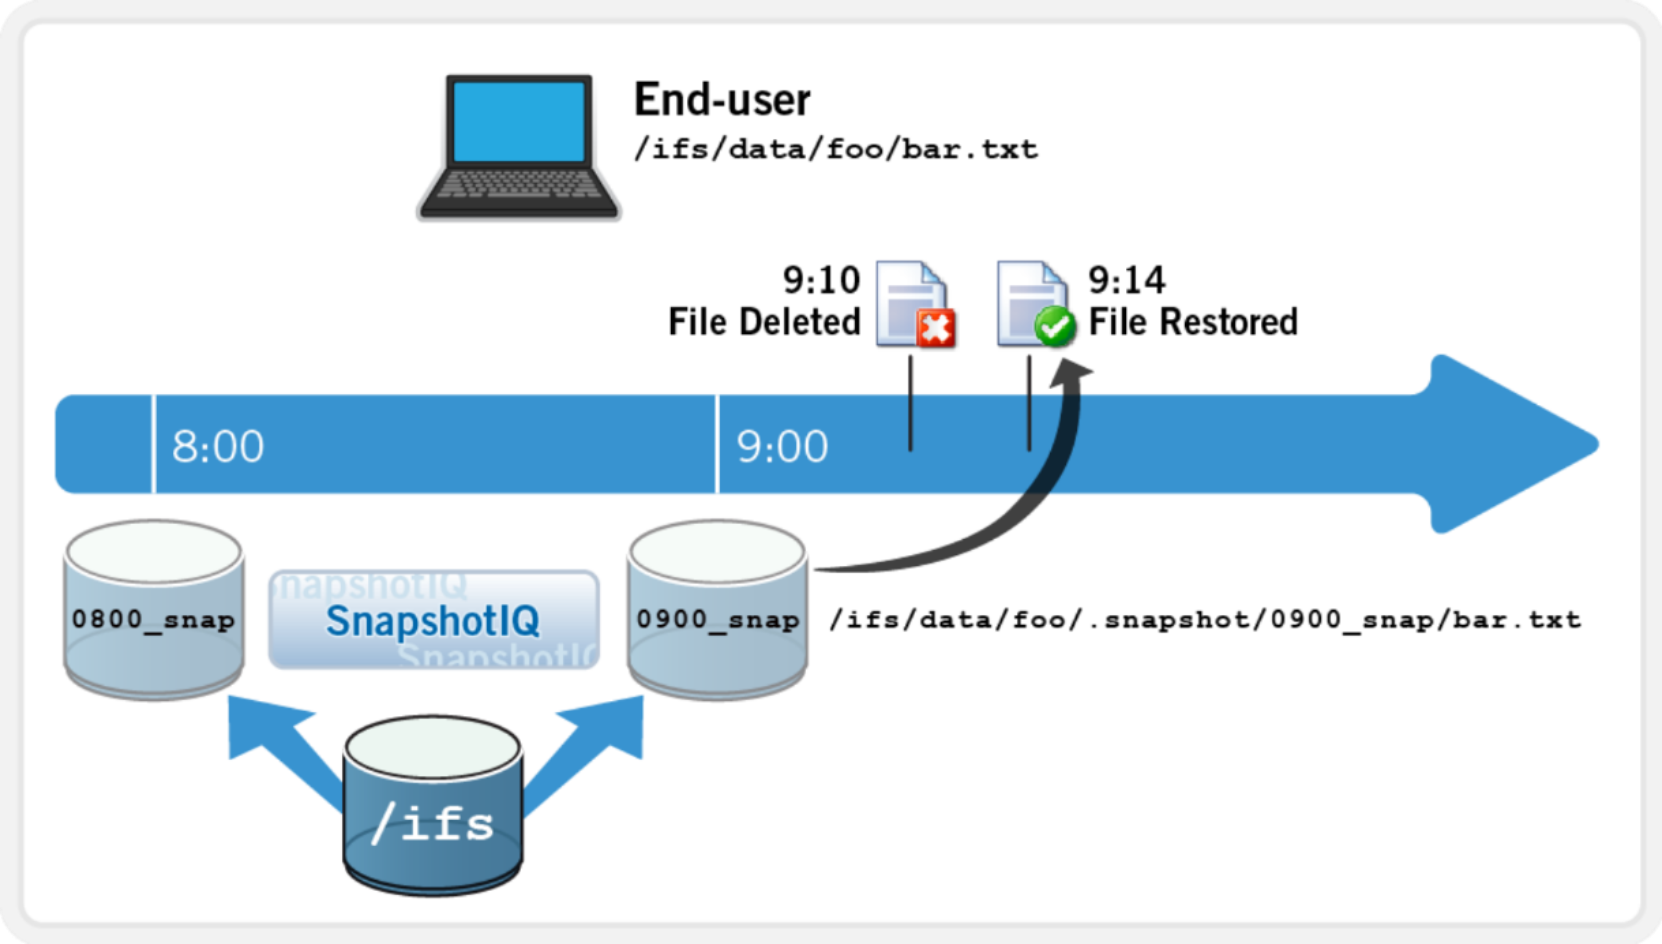 User can use SnapshotIQ to recover deleted file based on timestamp.